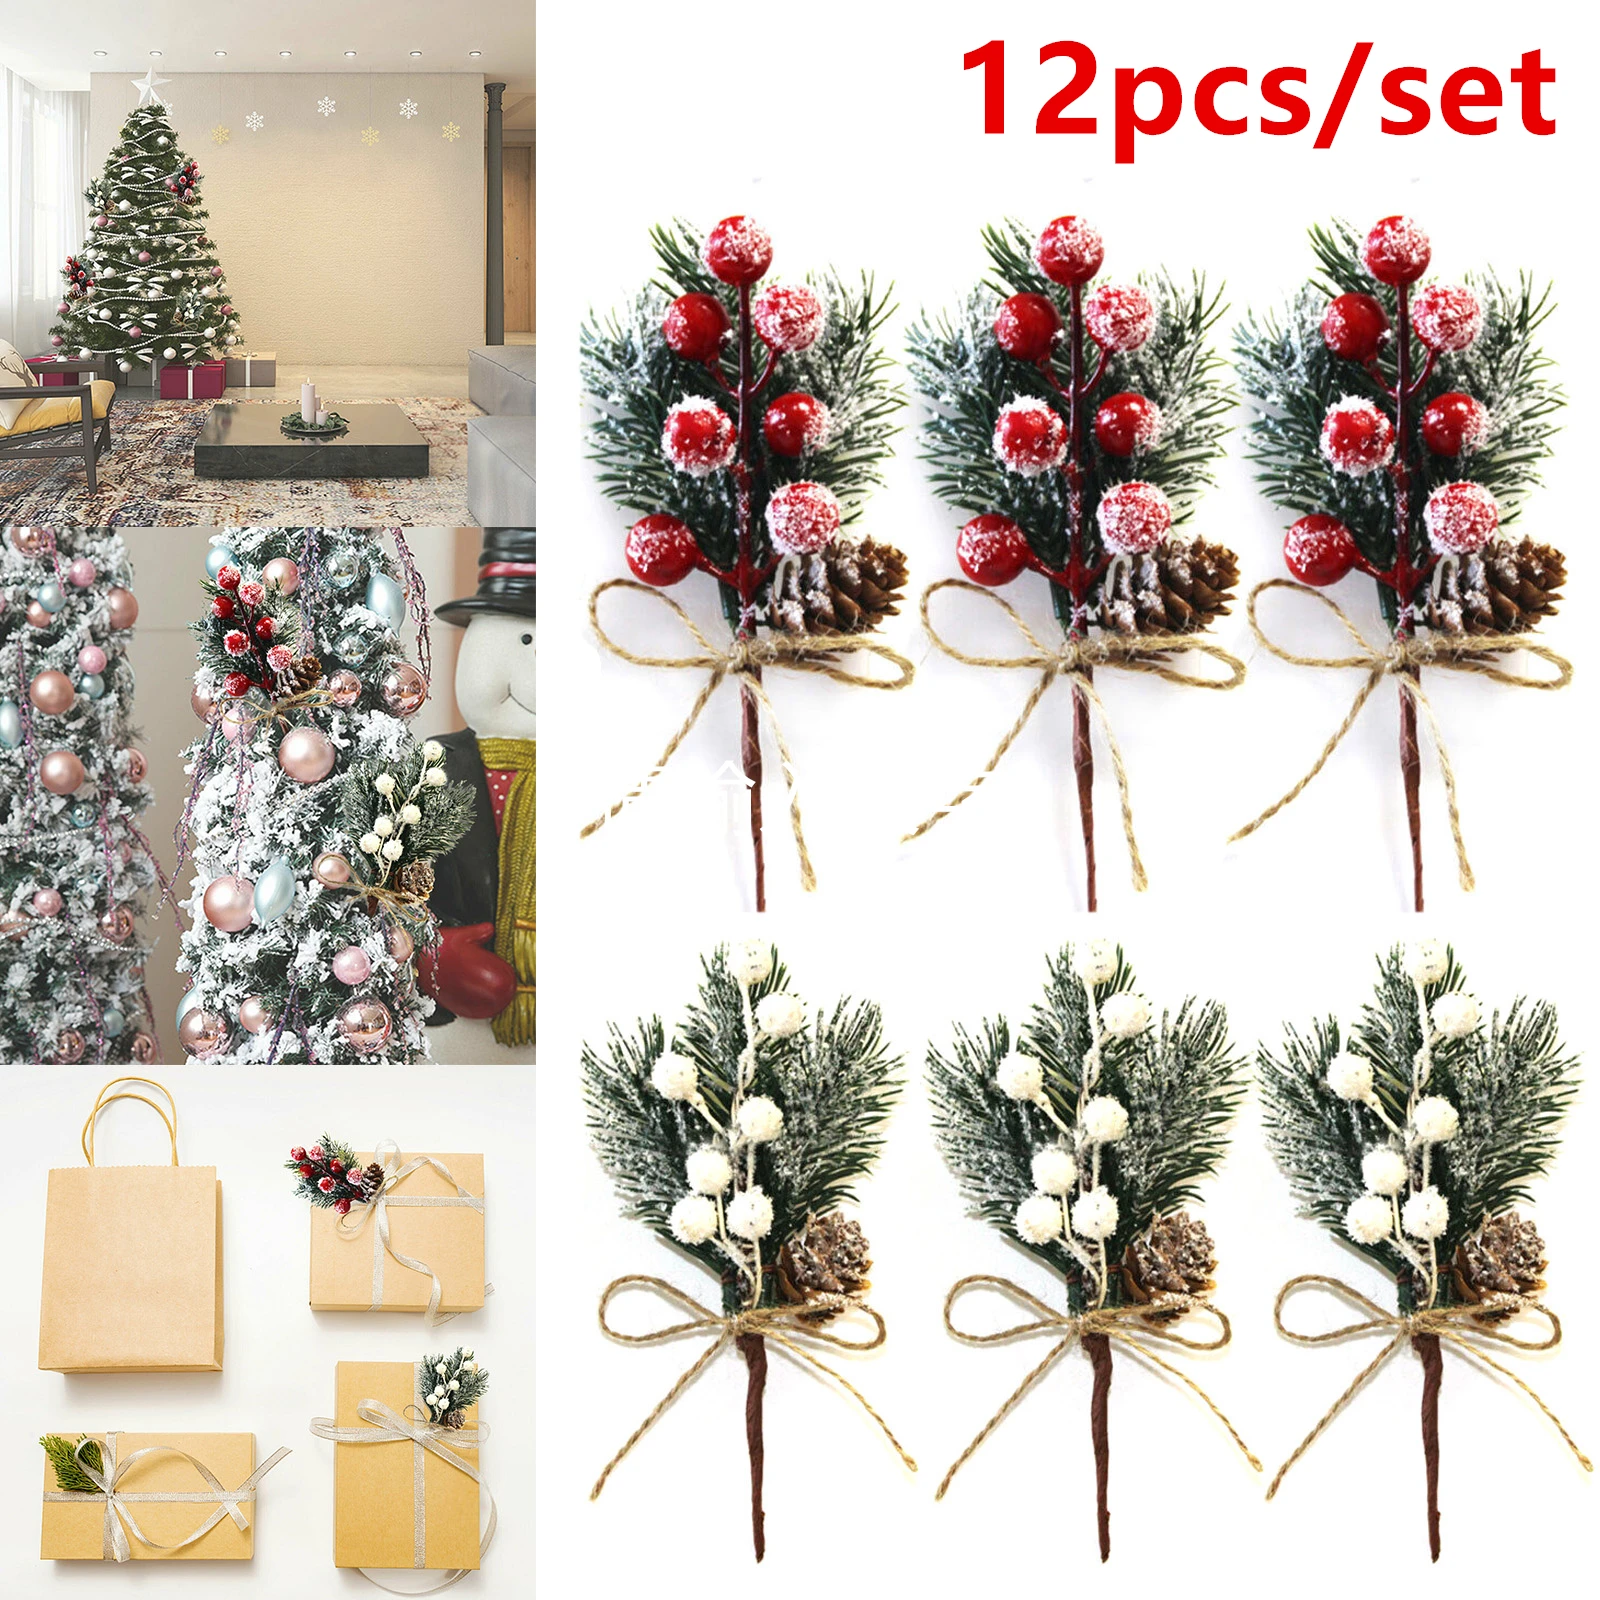 

12pcs Christmas Artificial Pine Branch Berry Holly Flower Bouquet Garland Access Xmas Tree Ornament Gift Packing Floral Picks